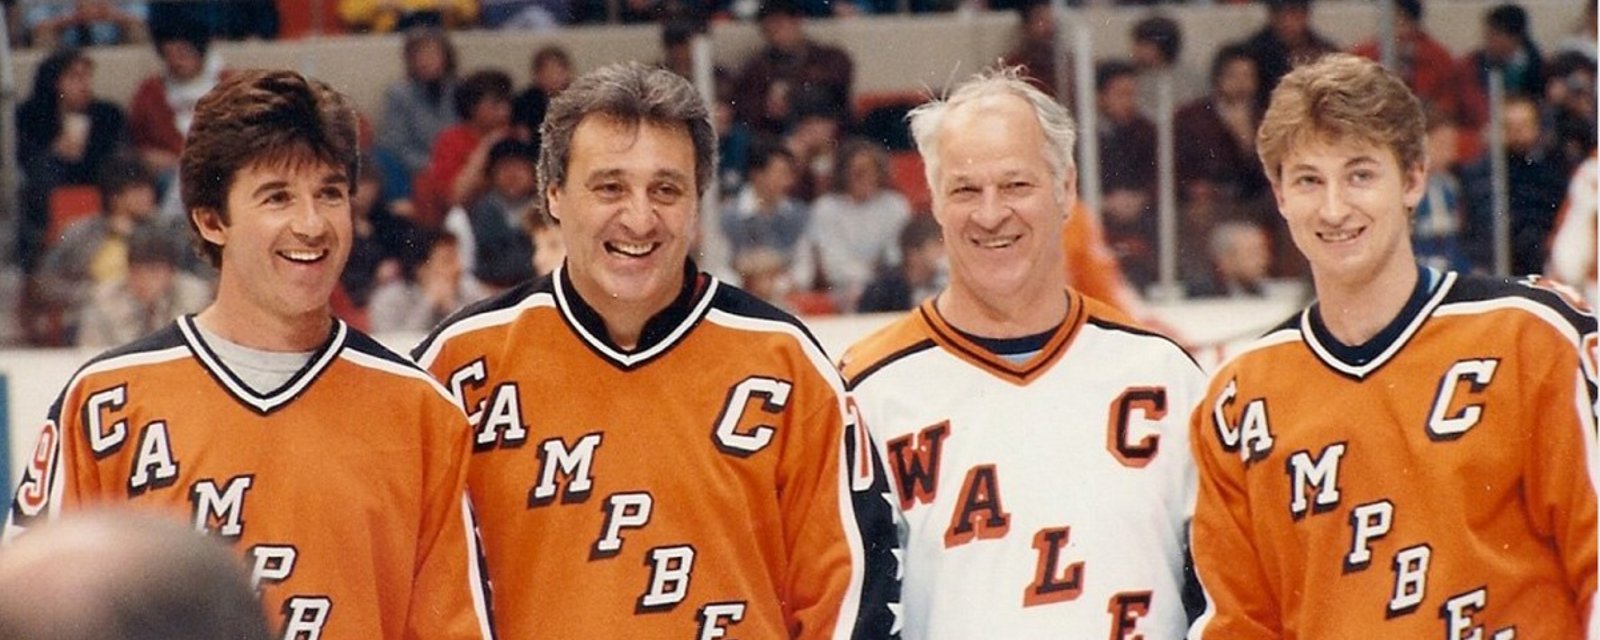 Celebrity ambassador for hockey has died of a heart attack while playing the game.